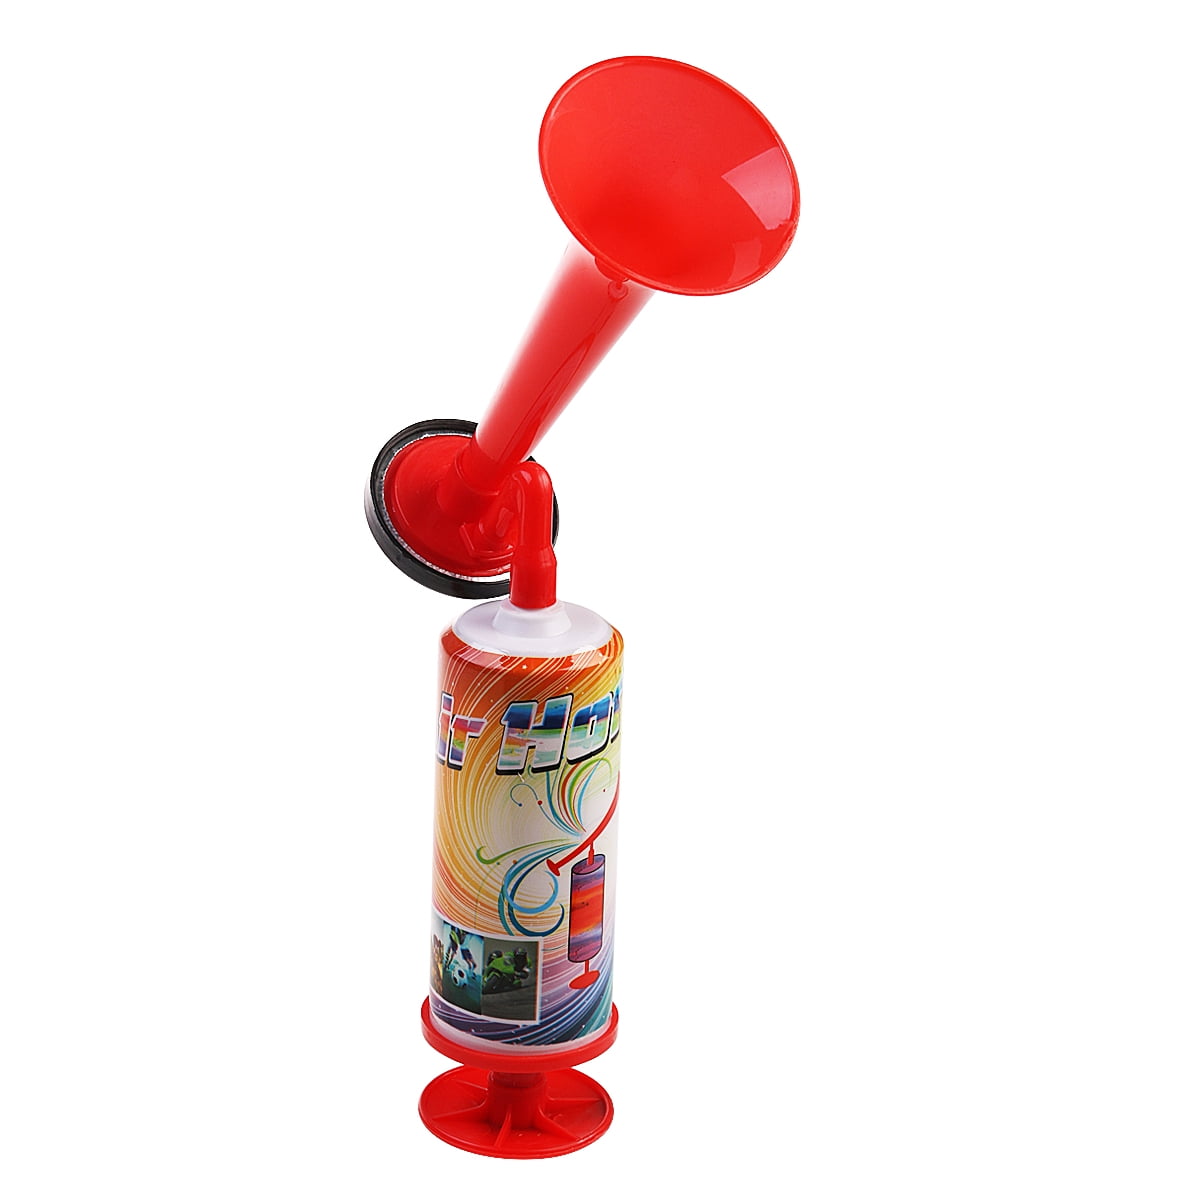 2 x Air Horn Gas Can Loud Hand Held Football Sport Event RED BLUE Top Choice 